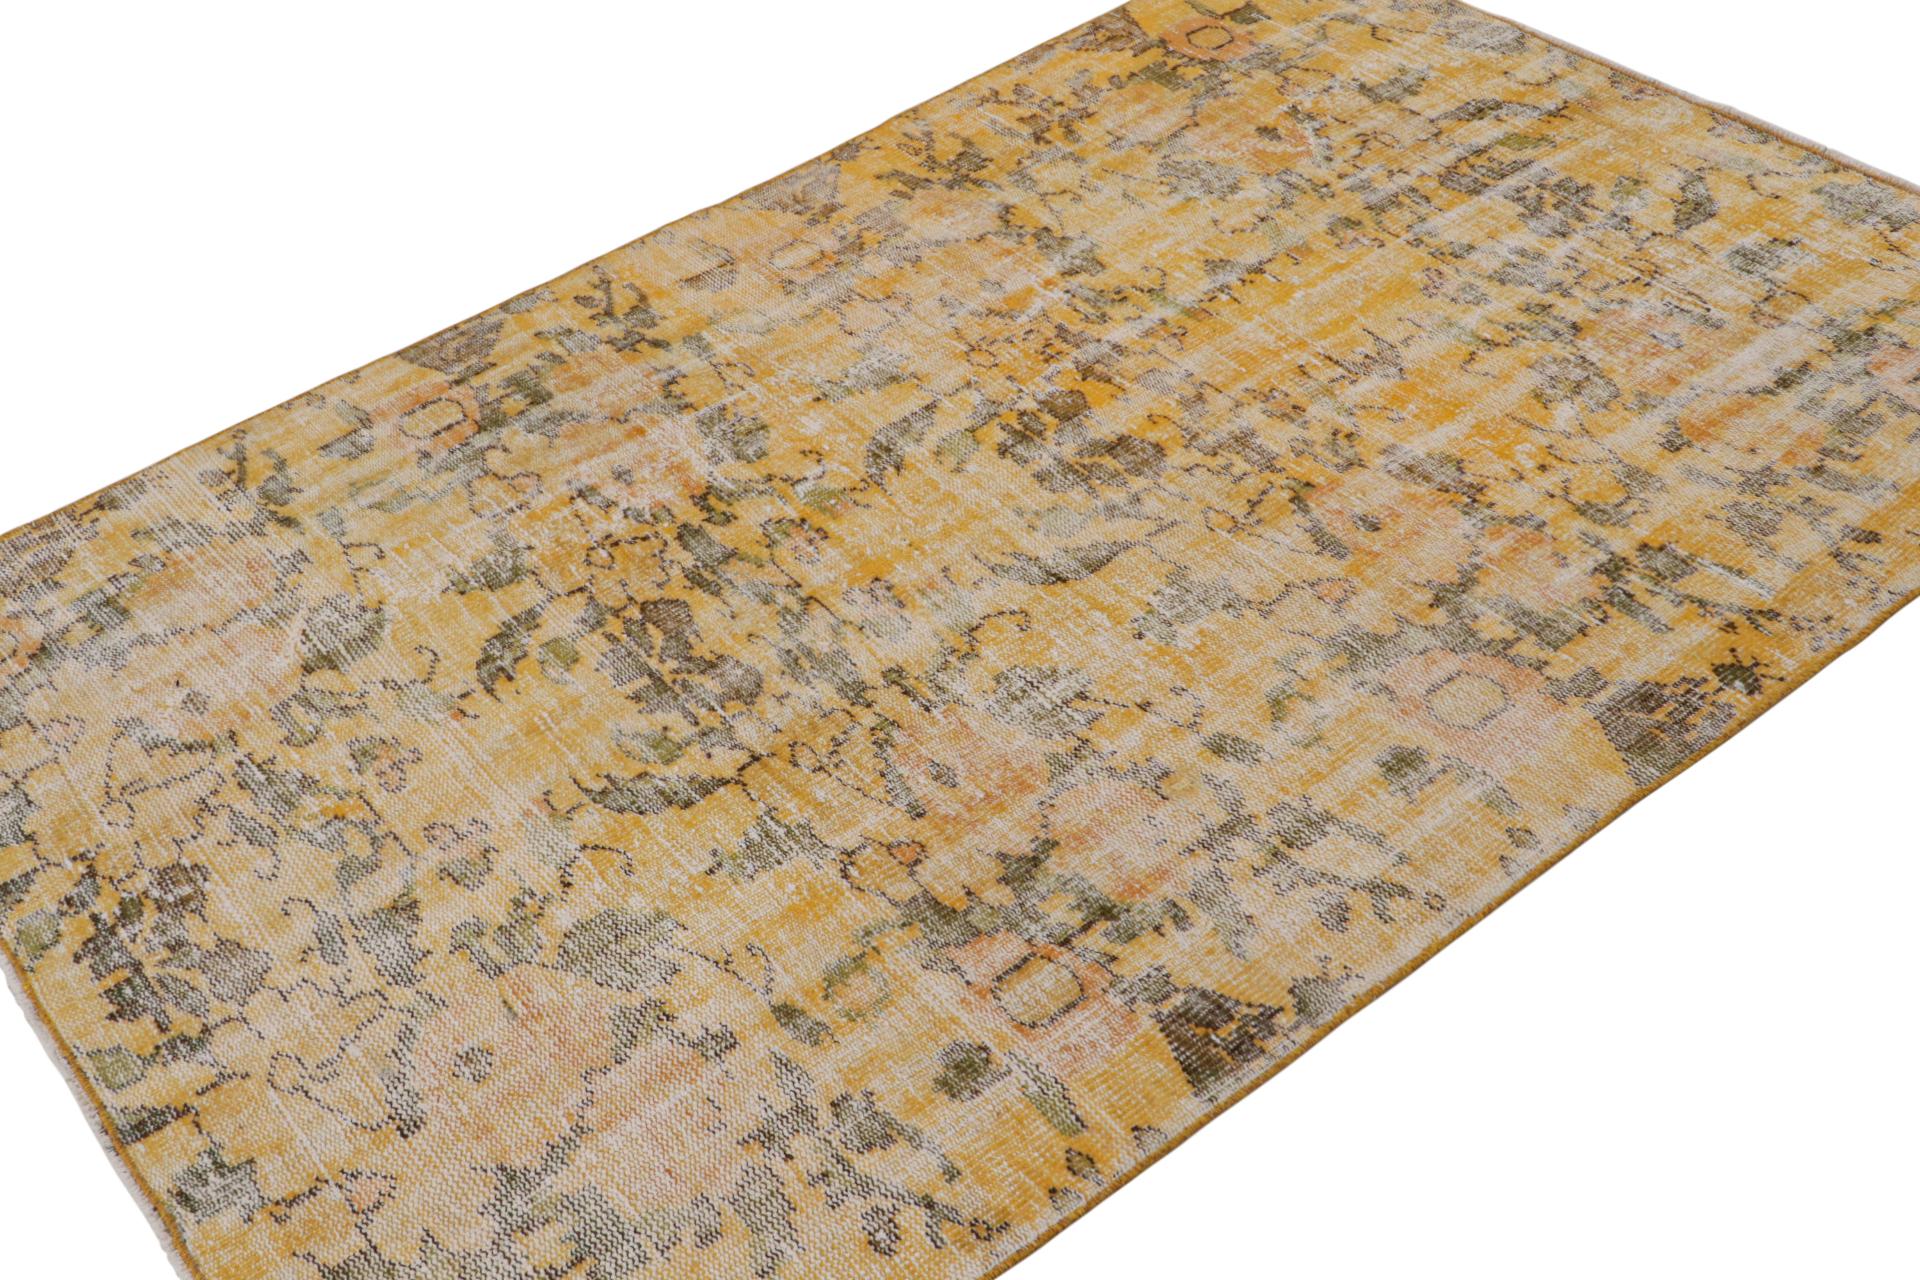 Hand-knotted in wool, circa 1960-1970, a 5x8 vintage rug believed to hail from Zeki Müren - latest to join Rug & Kilim’s collection of vintage selections. 

On the Design: 

This vintage rug carries an all over floral pattern in brown atop gold.